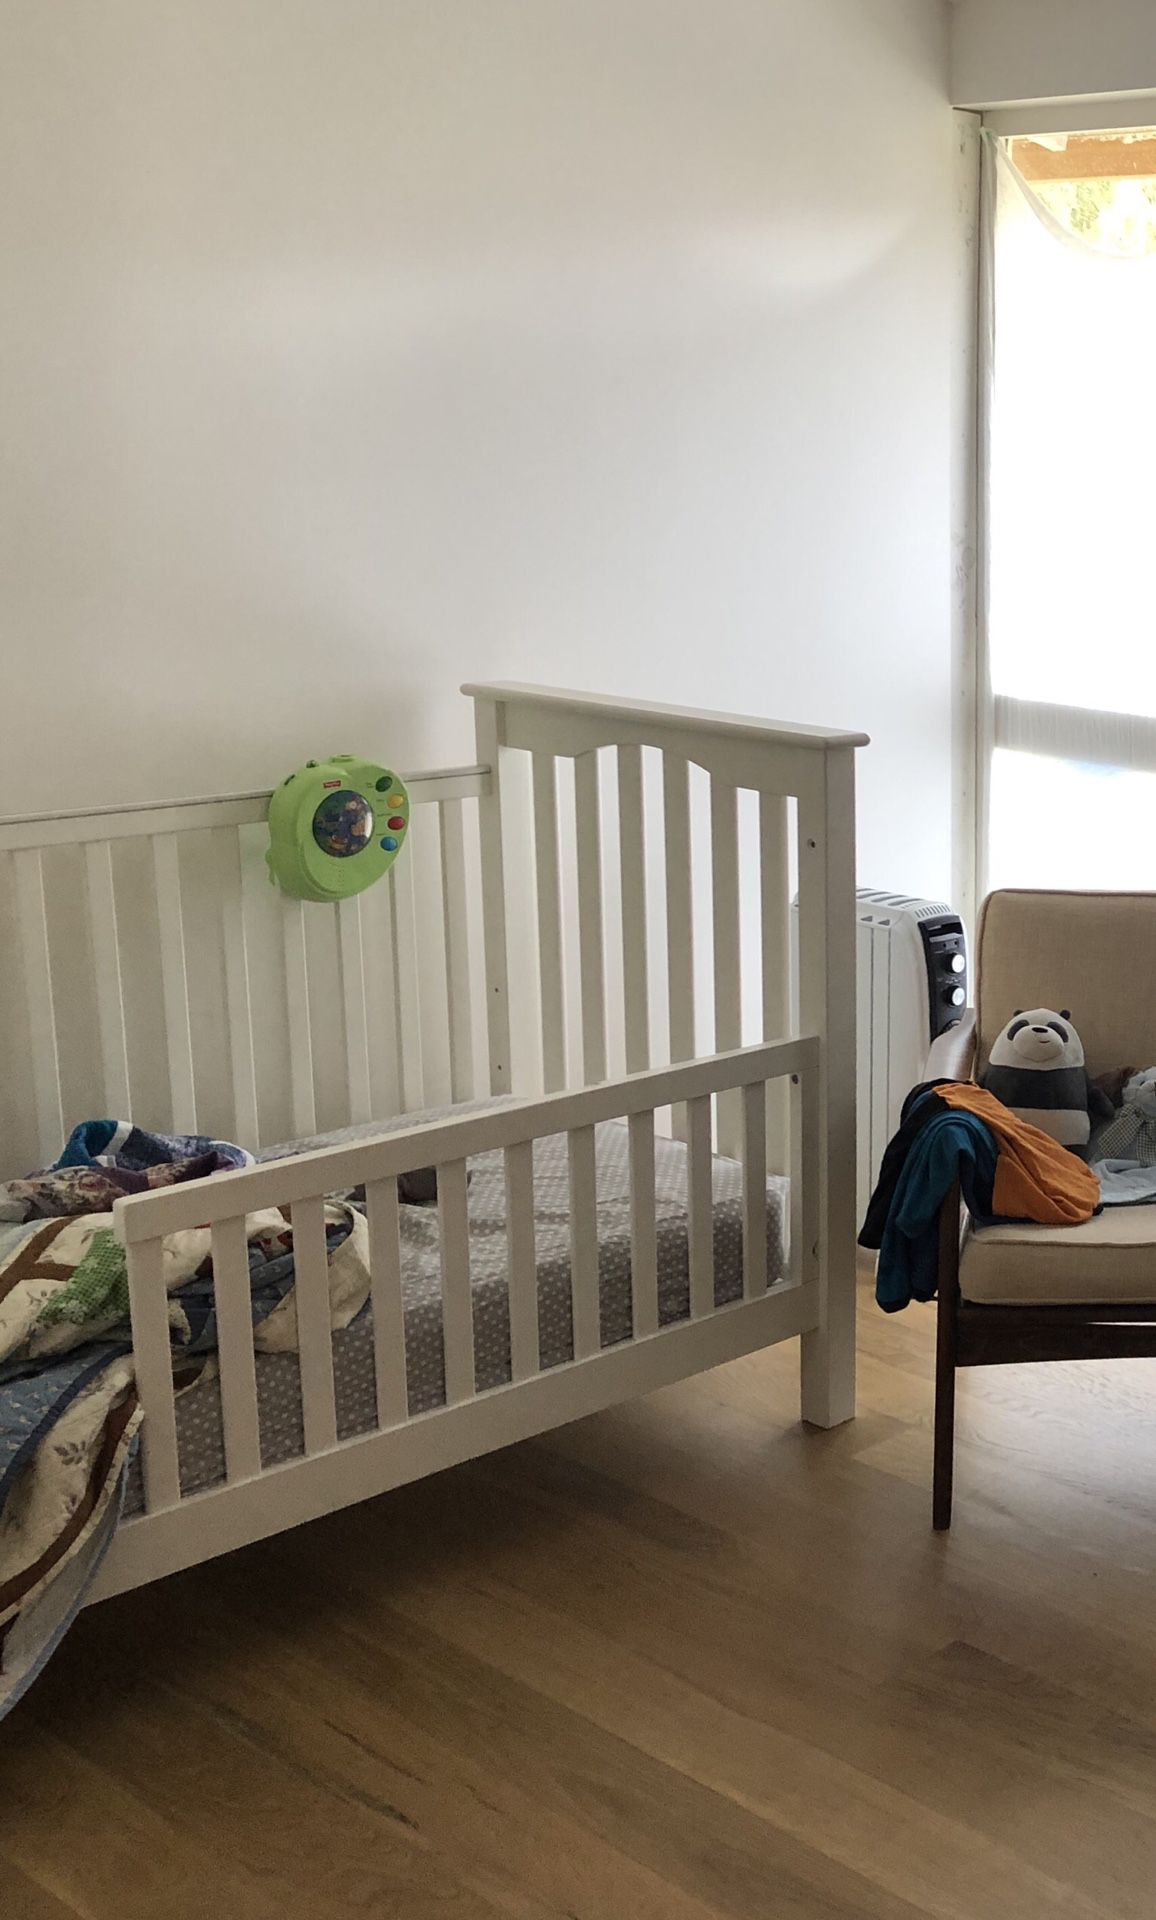 Pottery Barn Kendall Convertible Crib. Includes full crib, convertible toddler bed, and FREE mattress